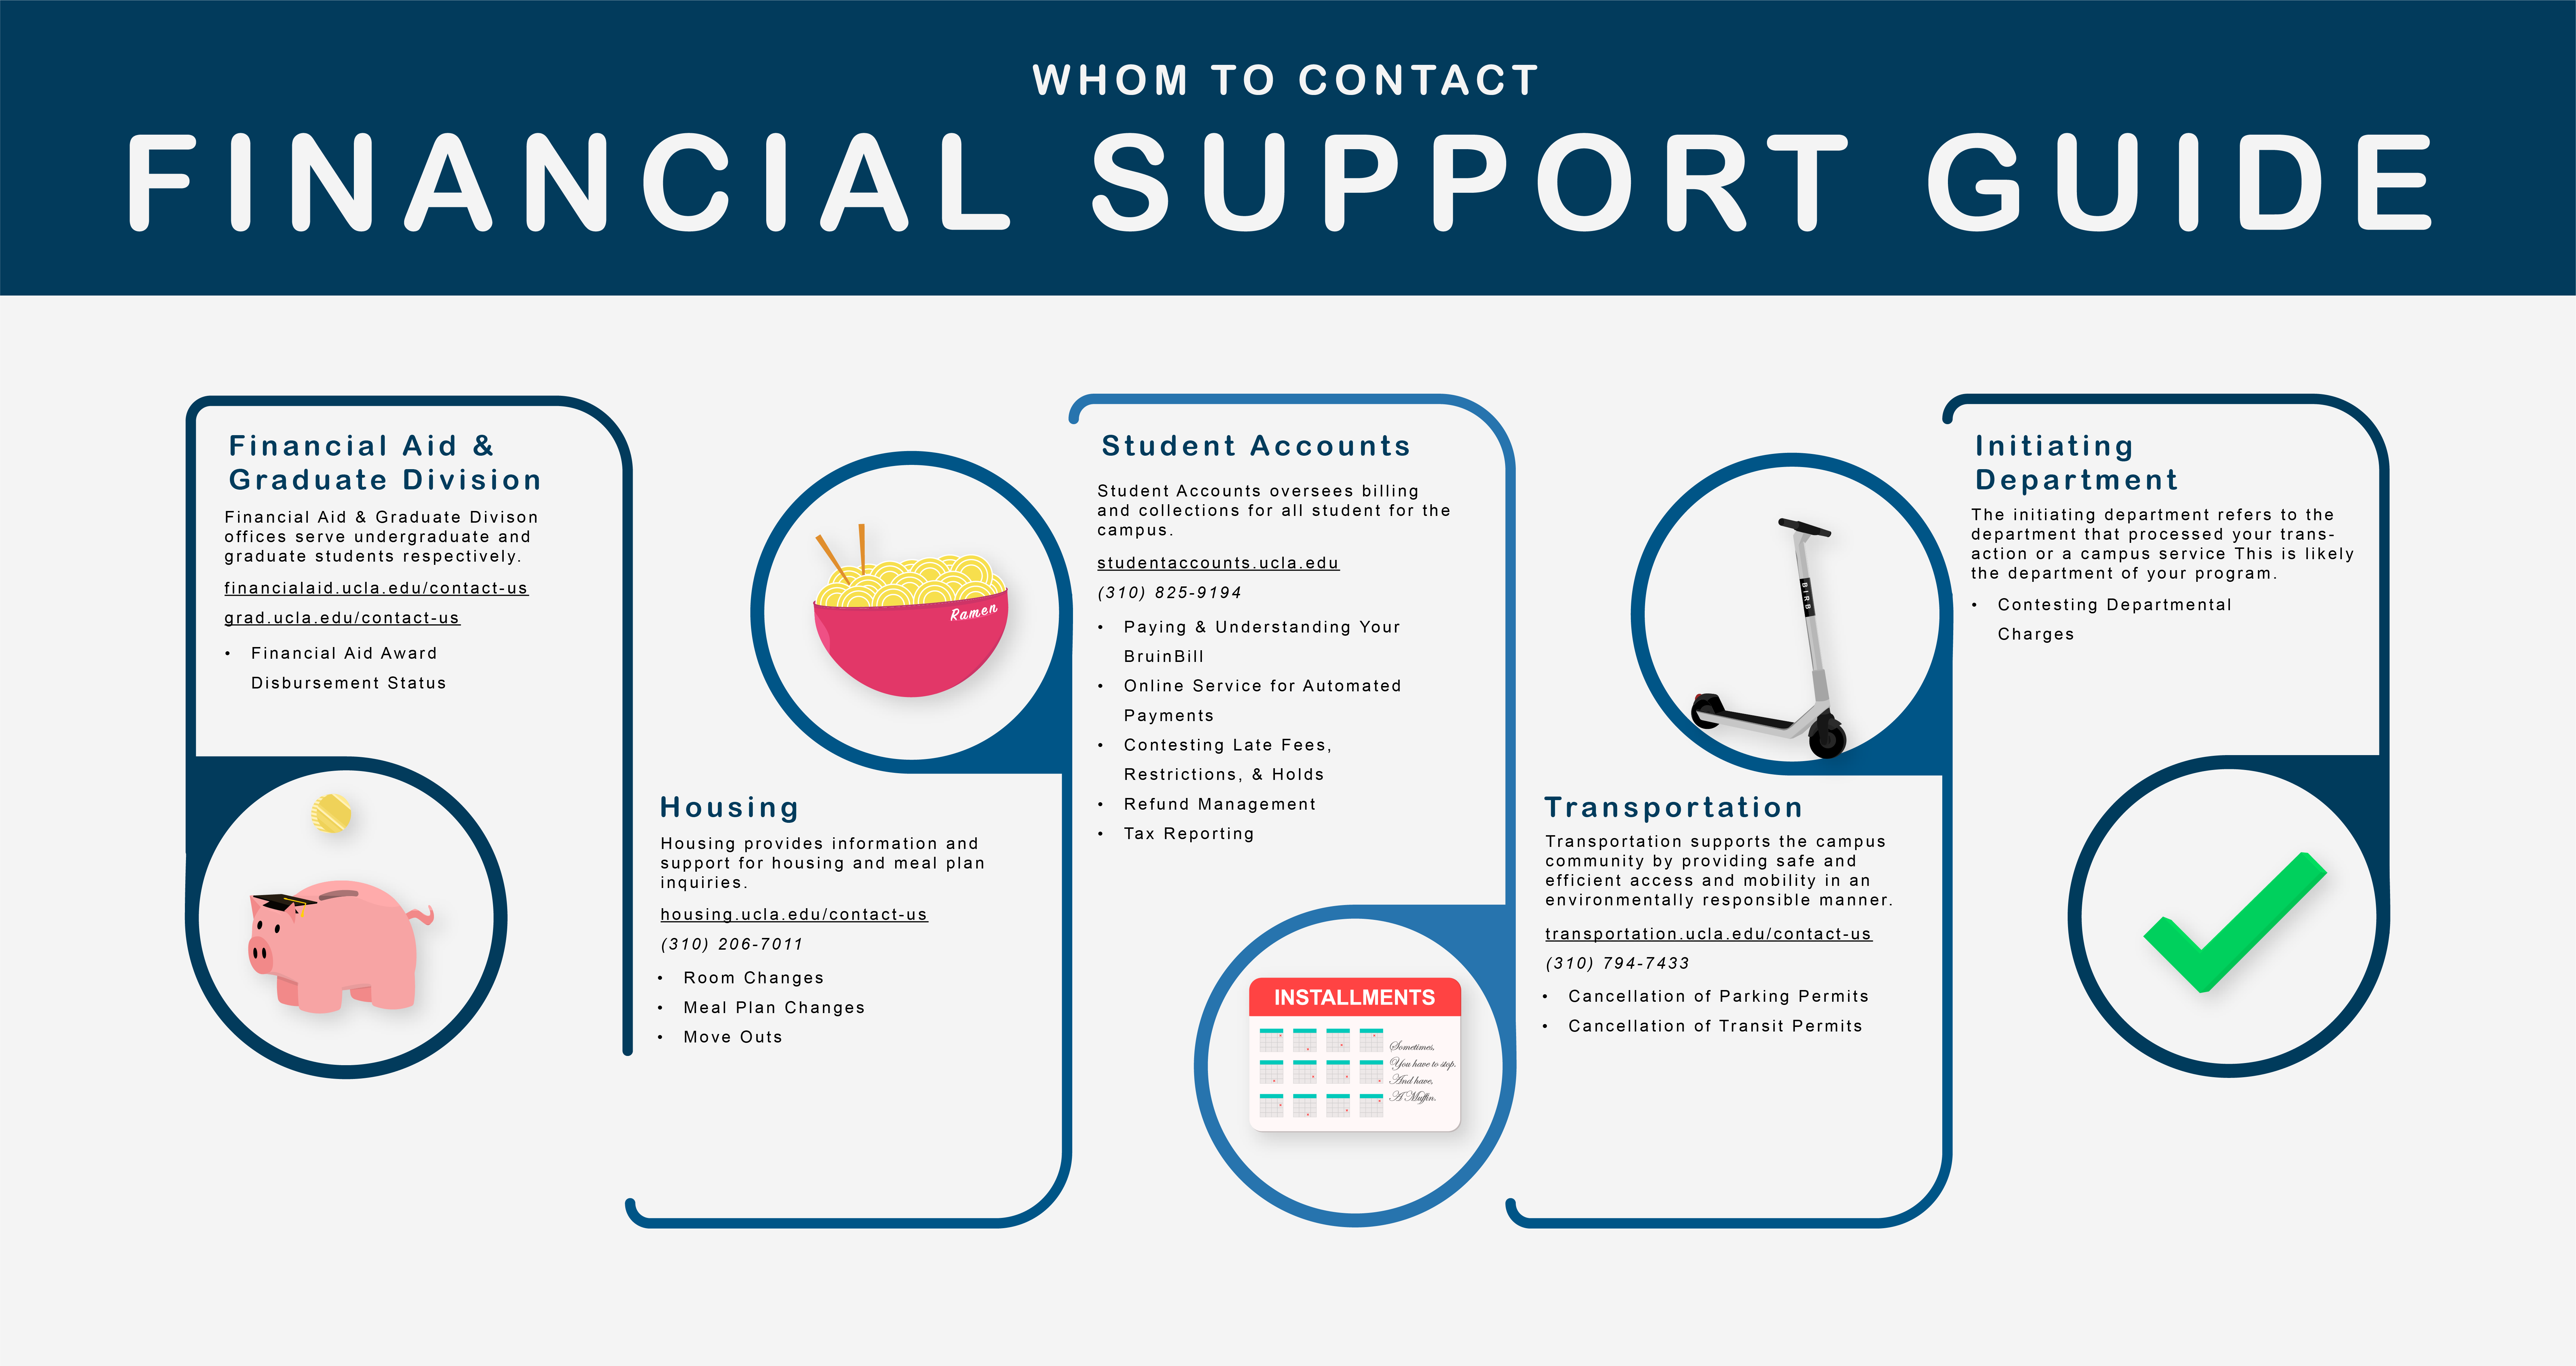 Financial Support Guide that outlines what department to contact for BruinBill questions.